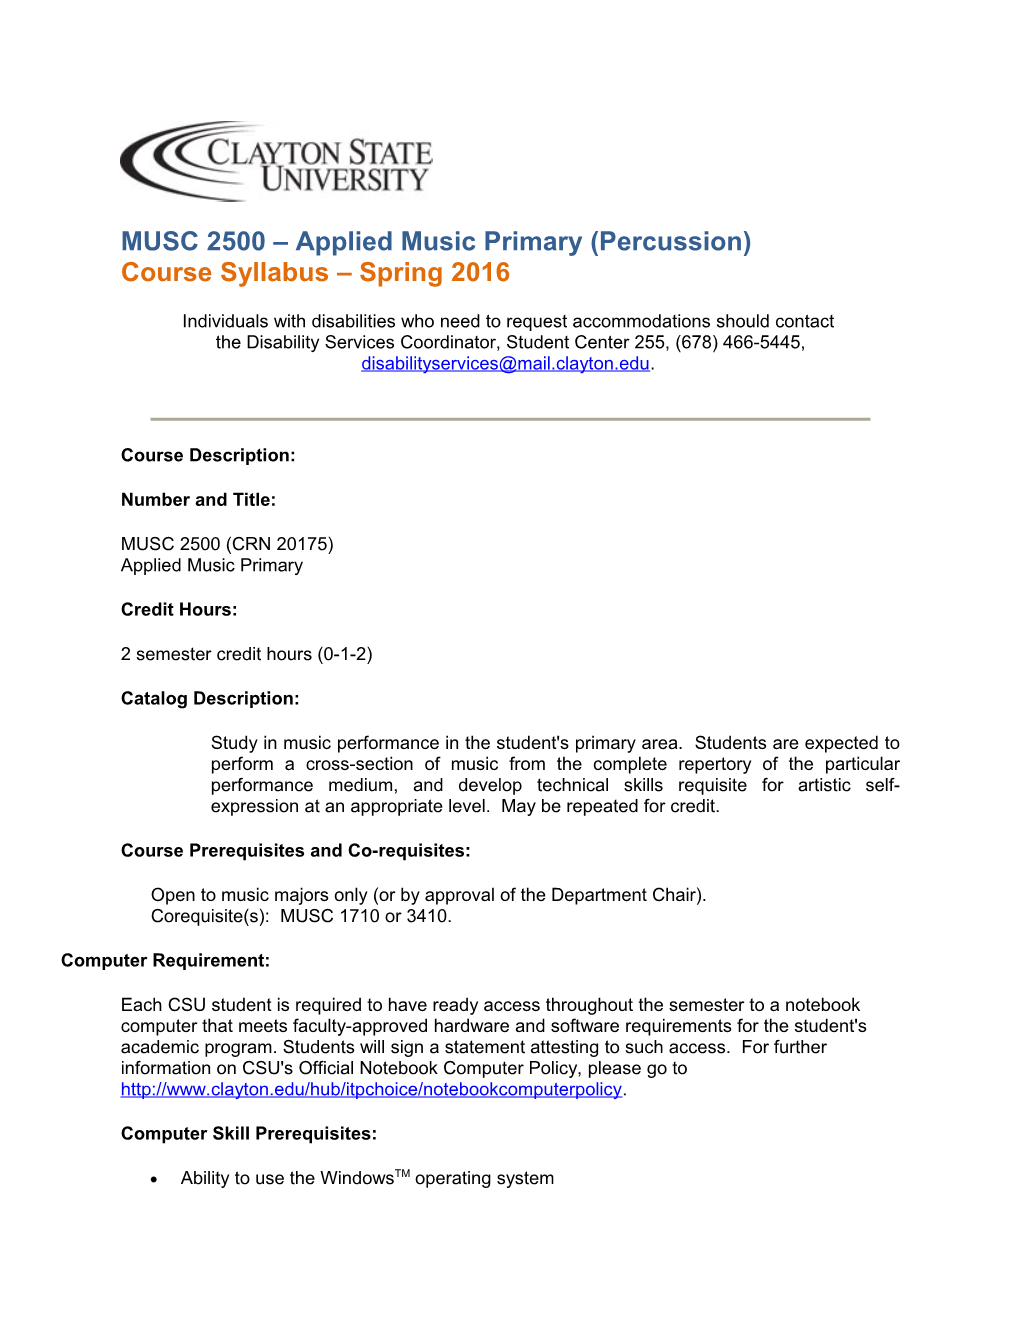 MUSC 2500 Applied Music Primary (Percussion) Course Syllabus Spring2016